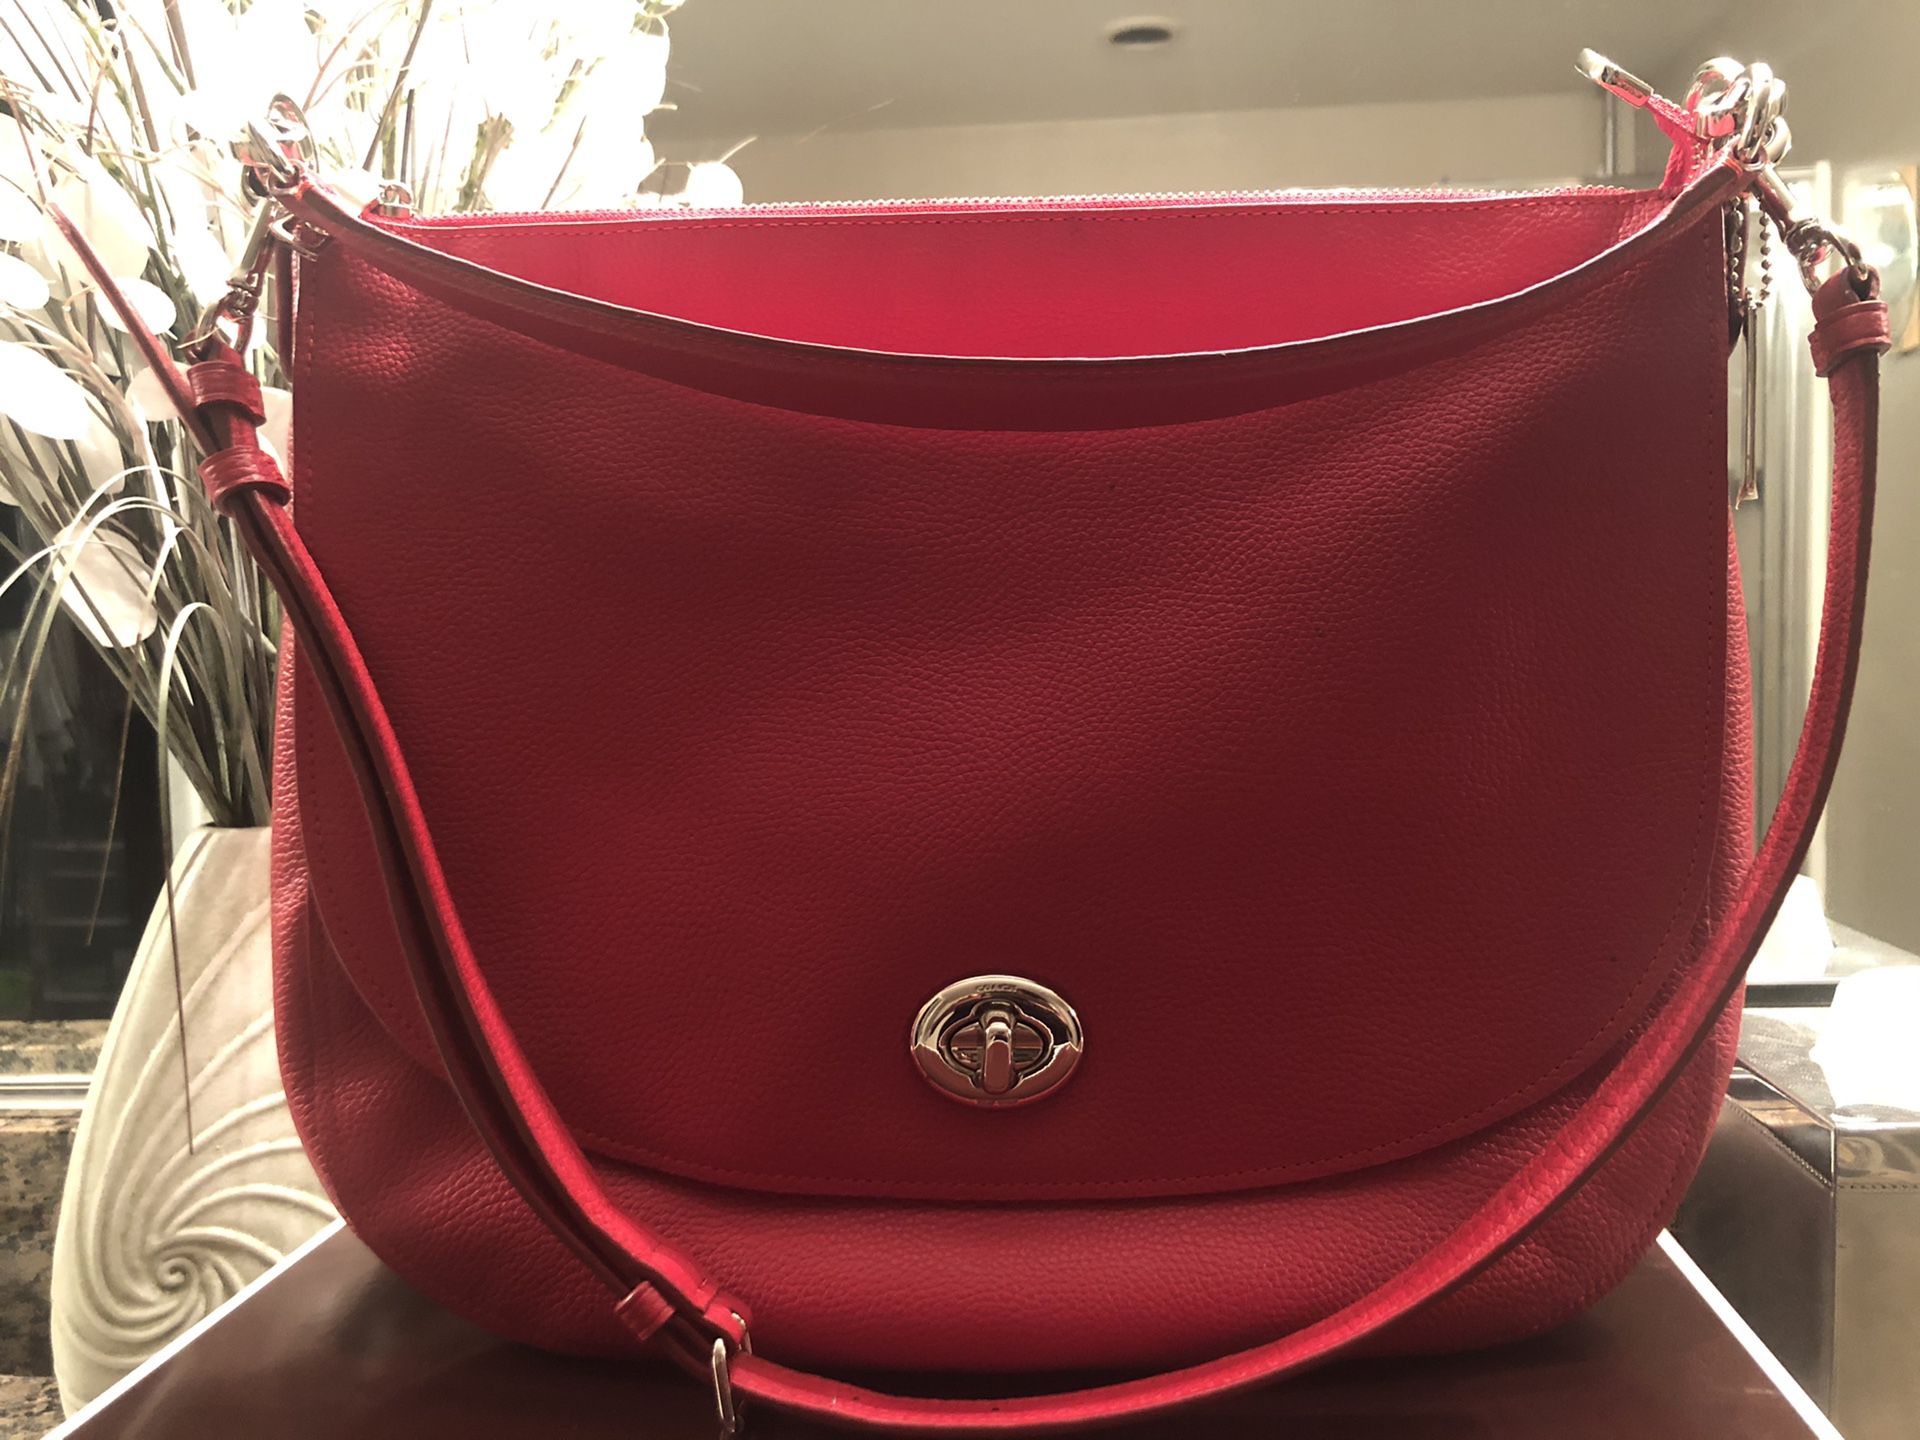 Coach Turnlock Hobo in red pebble leather